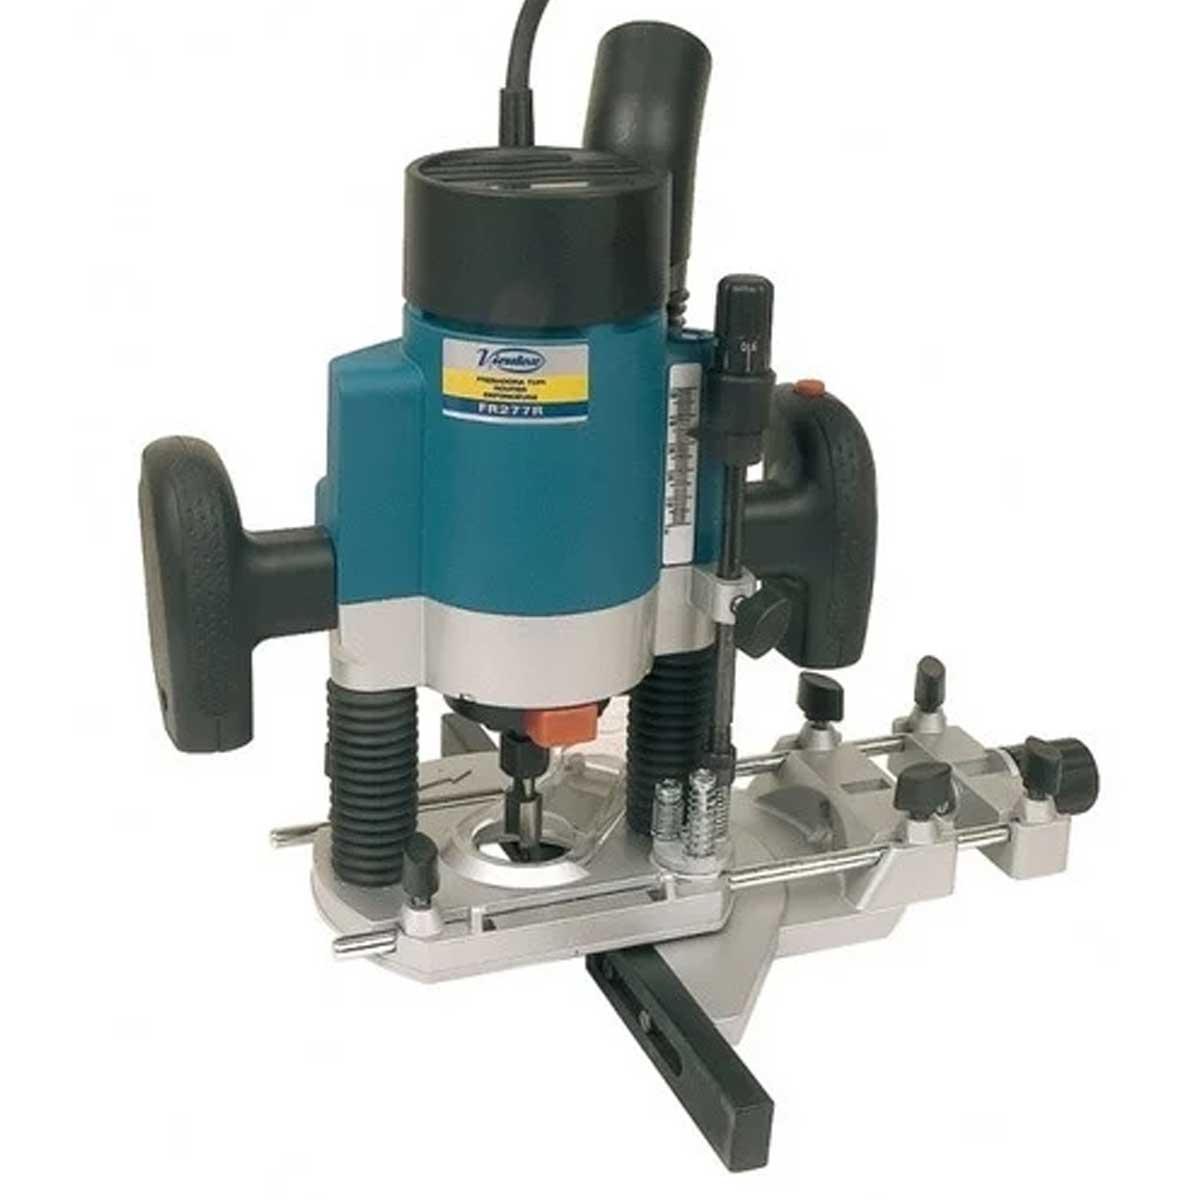 Surface Router Manufacturers, Suppliers in Karnataka